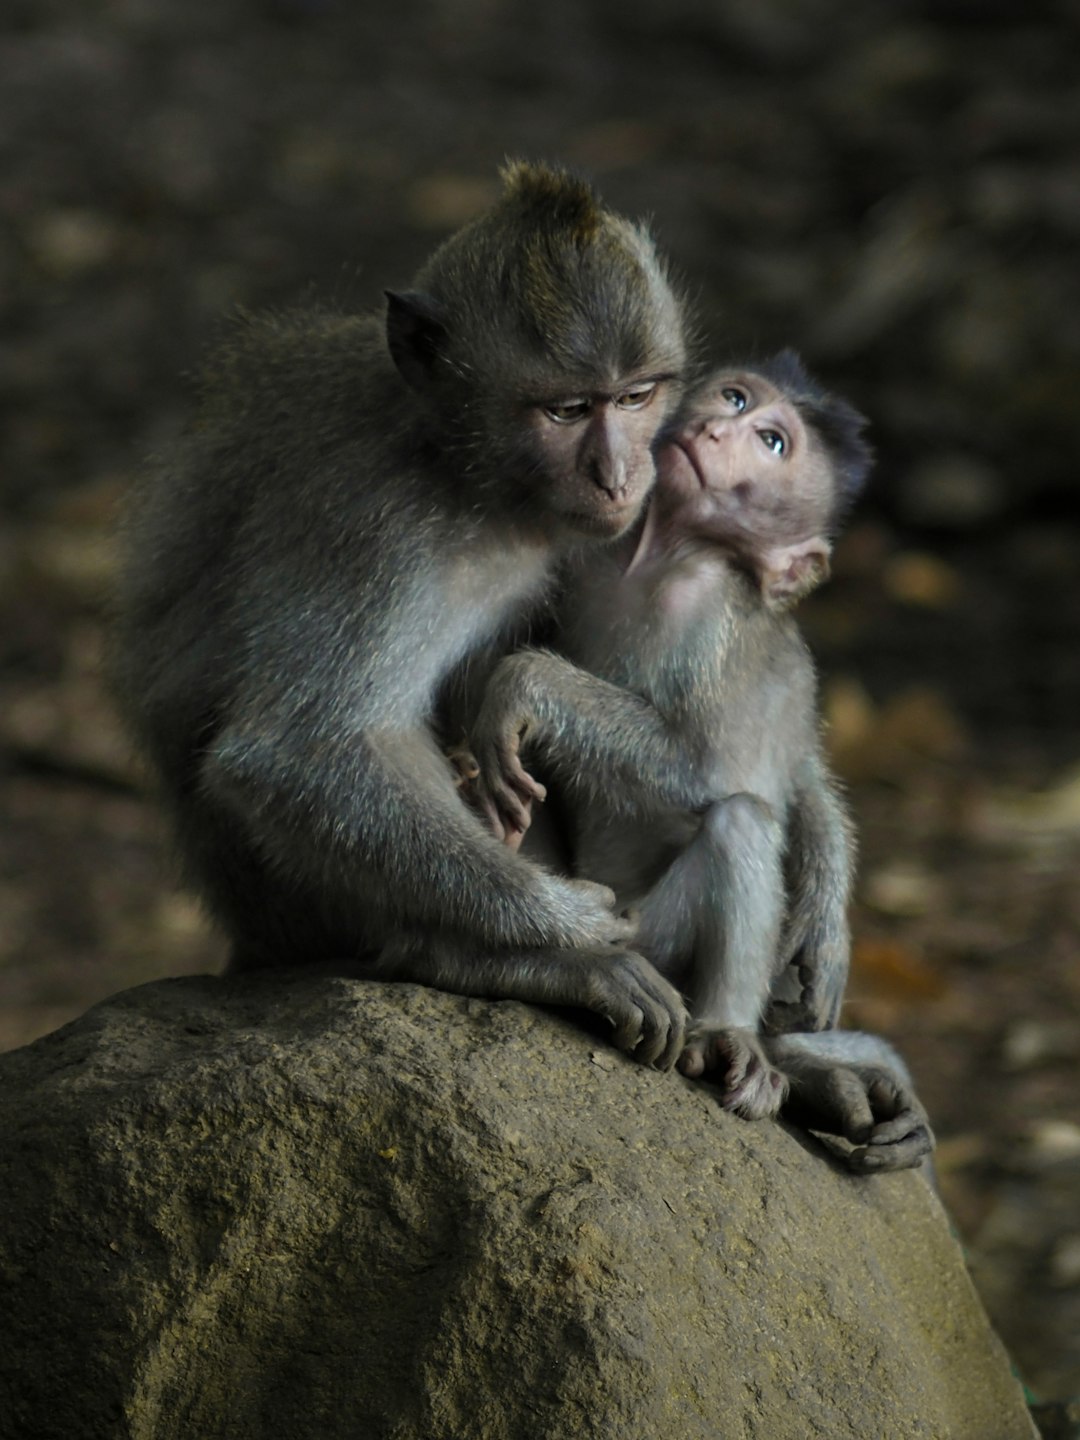 monkey baby with mother on a rock in Bali, Indonesia